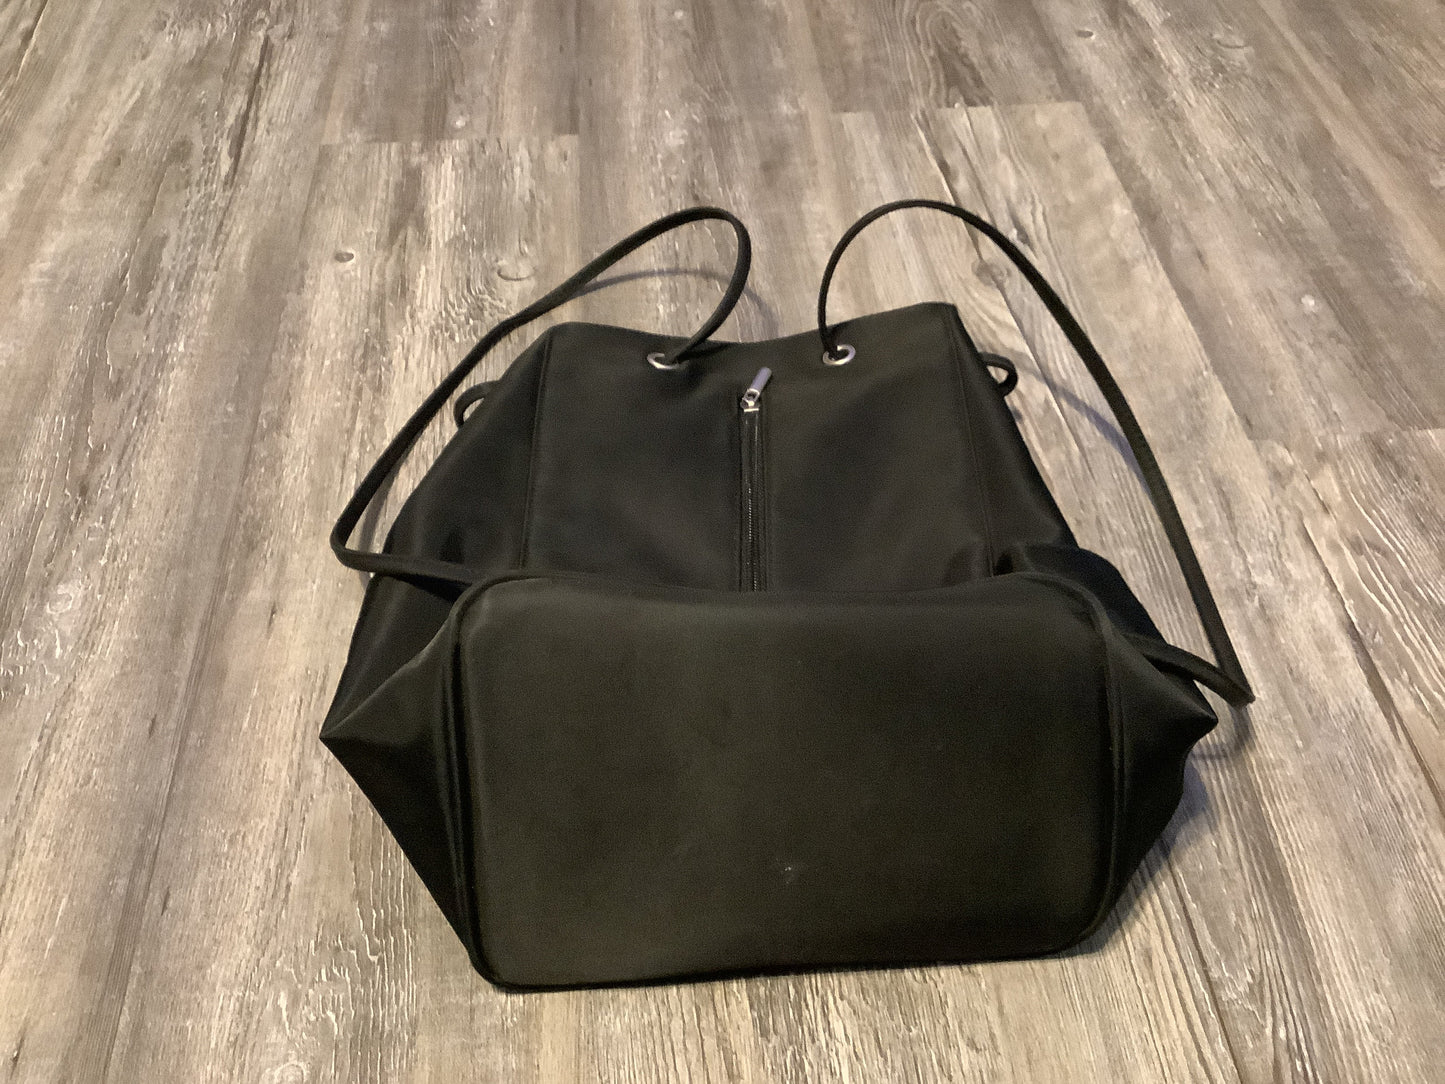 Backpack By Saks Fifth Avenue  Size: Medium